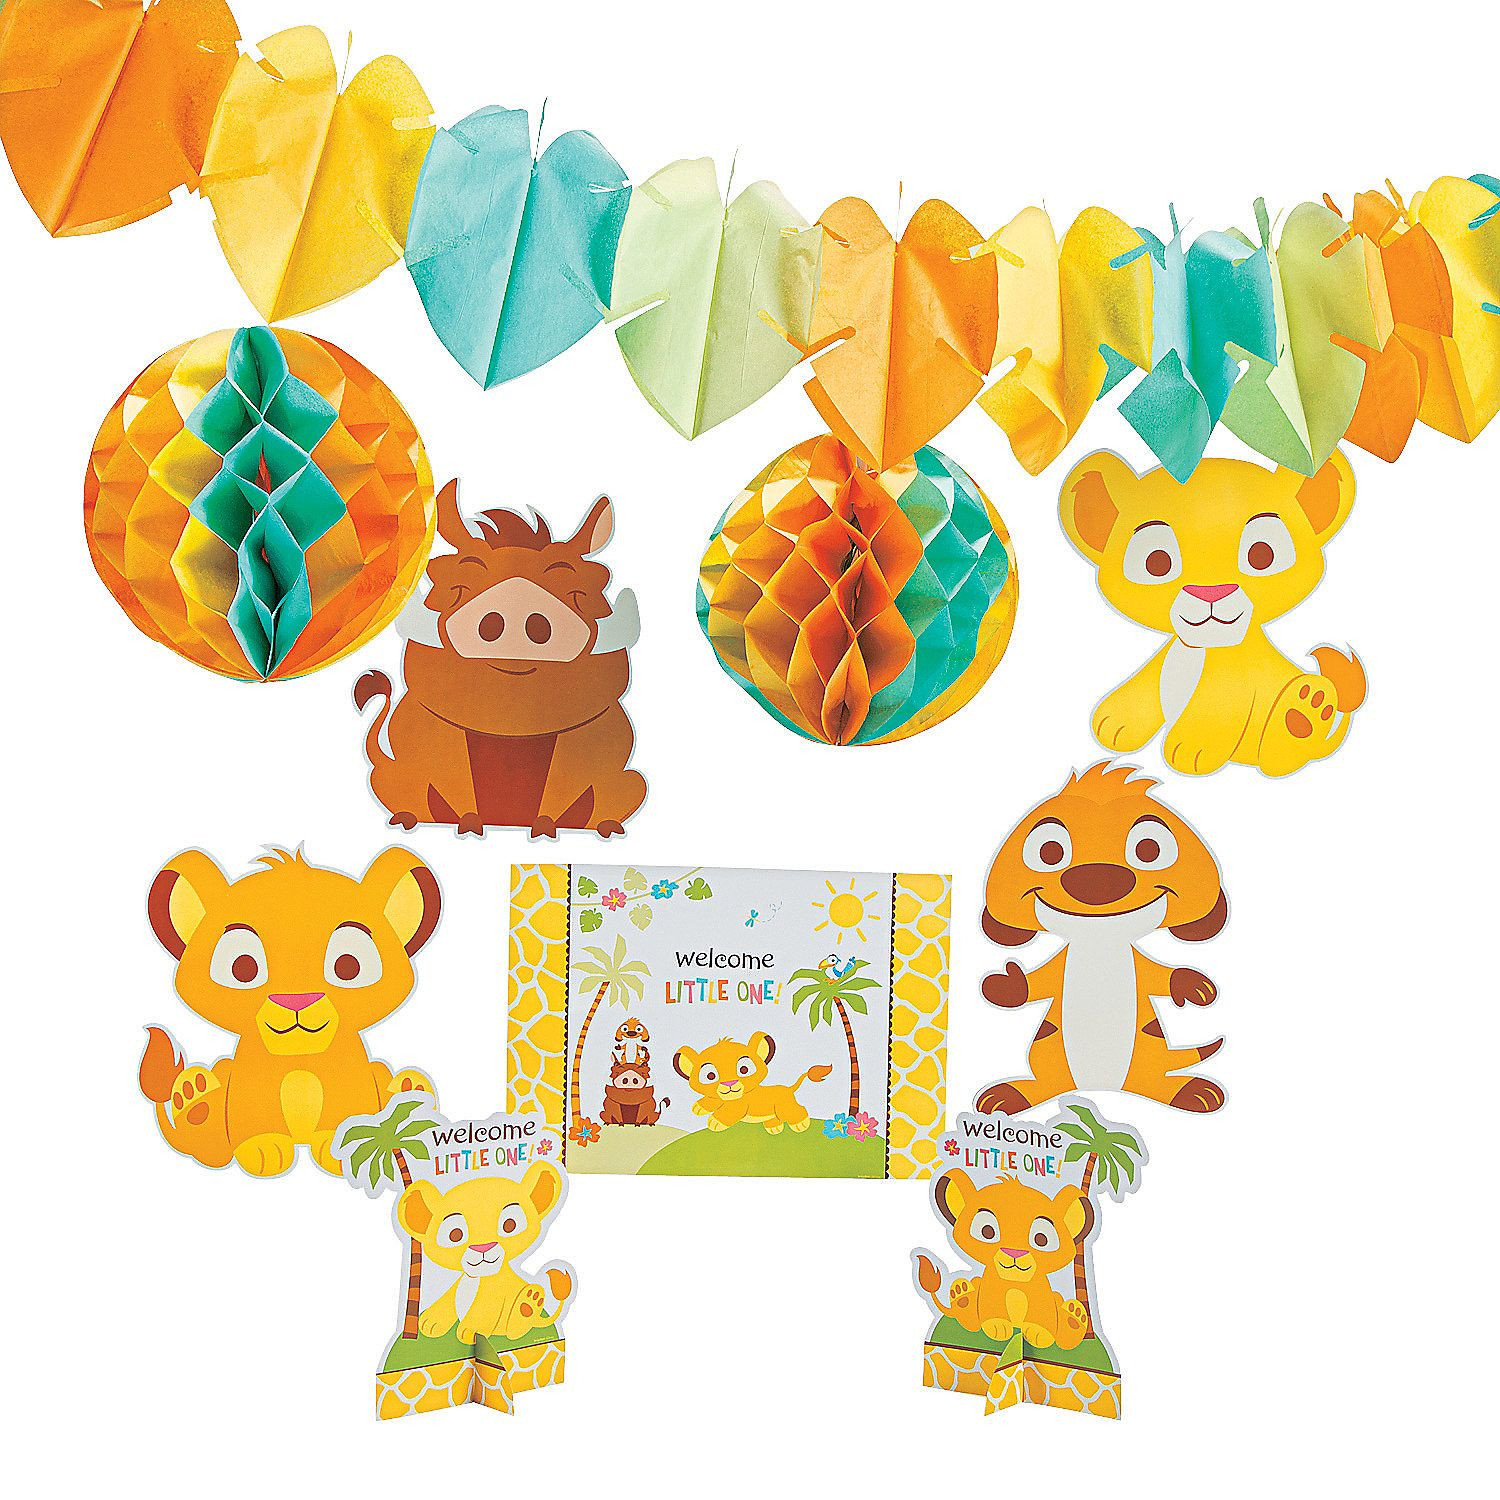 Sweet Circle Of Life Baby Shower Party Supplies
 again eaper Lion King Baby Decorating Kit